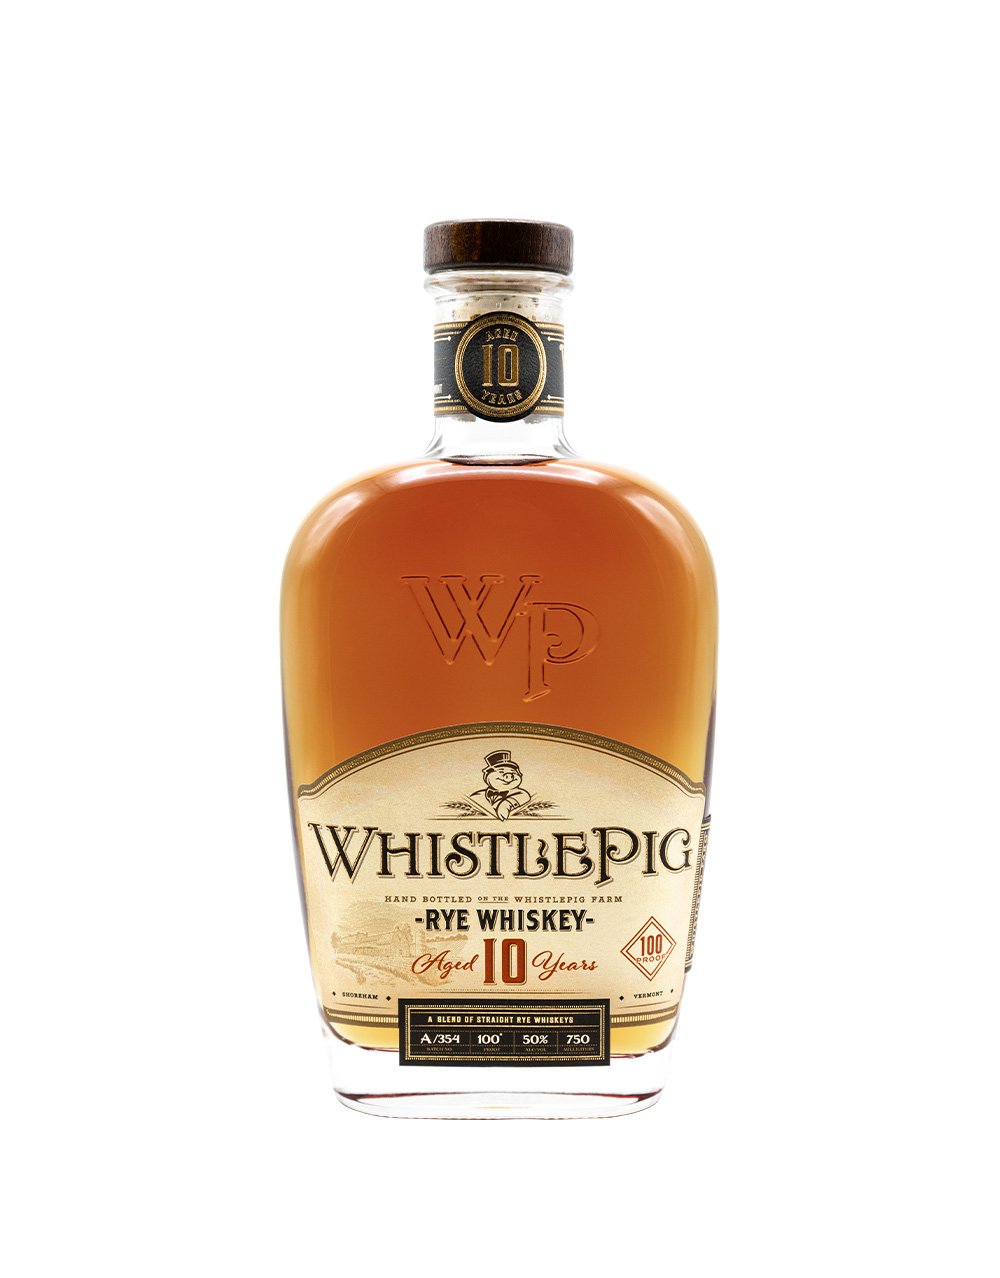 WhistlePig 10 Years 100 Proof Rye Whiskey bottle